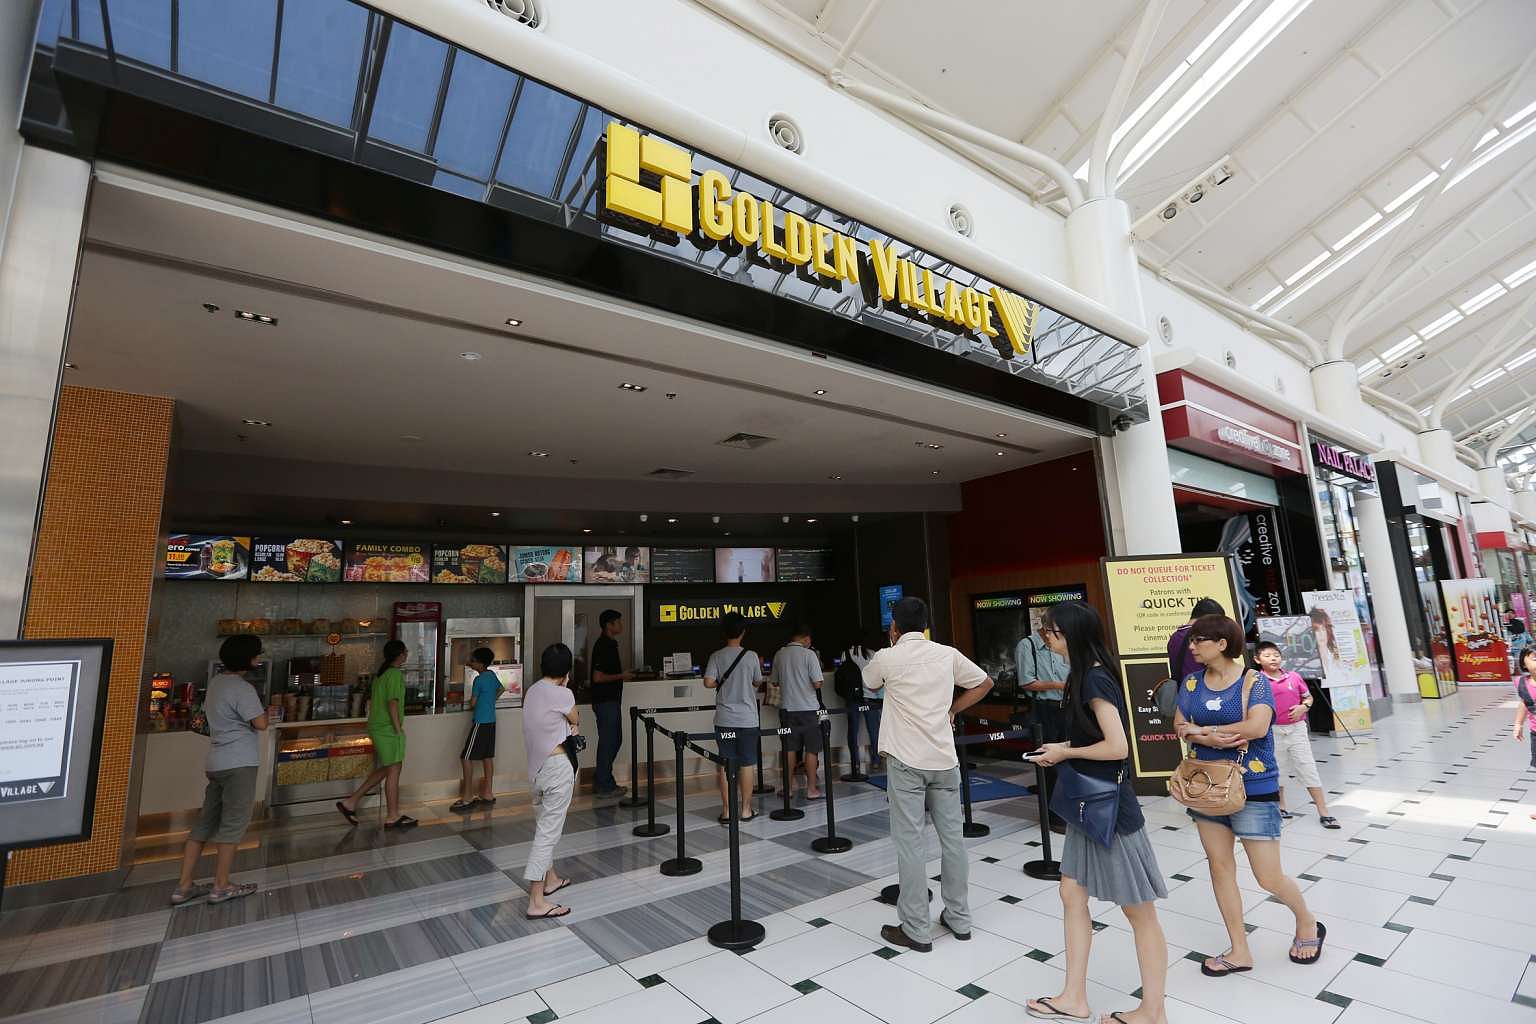 mm2 Asia to buy 50% stake in movie theatre operator Golden Village for  $184.3m